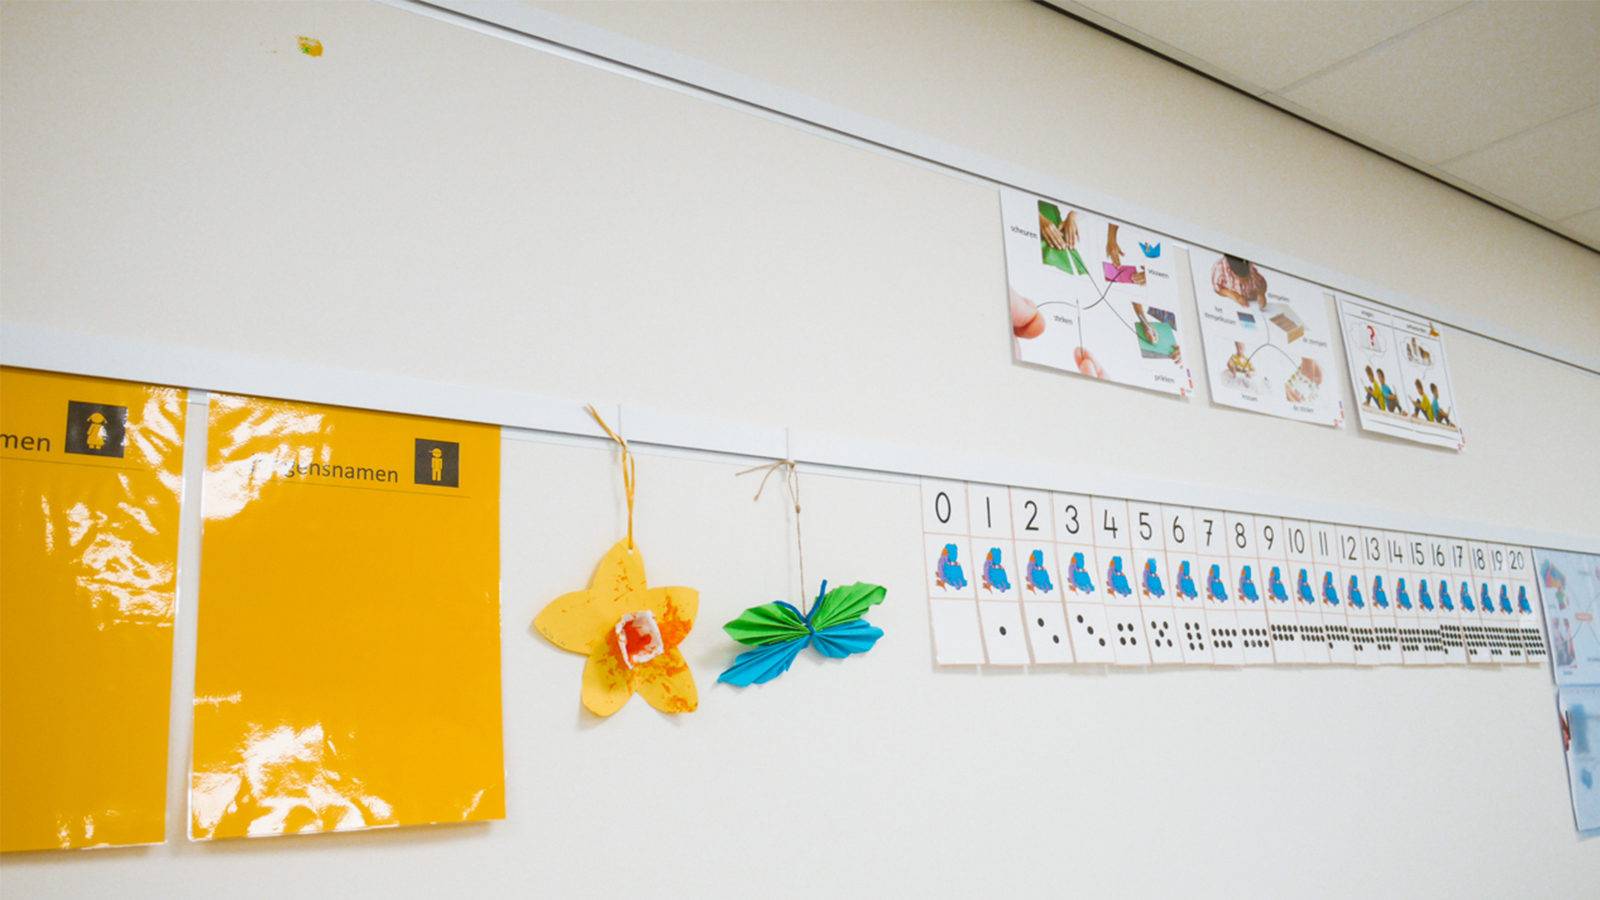 ES info rail hanging system in classroom